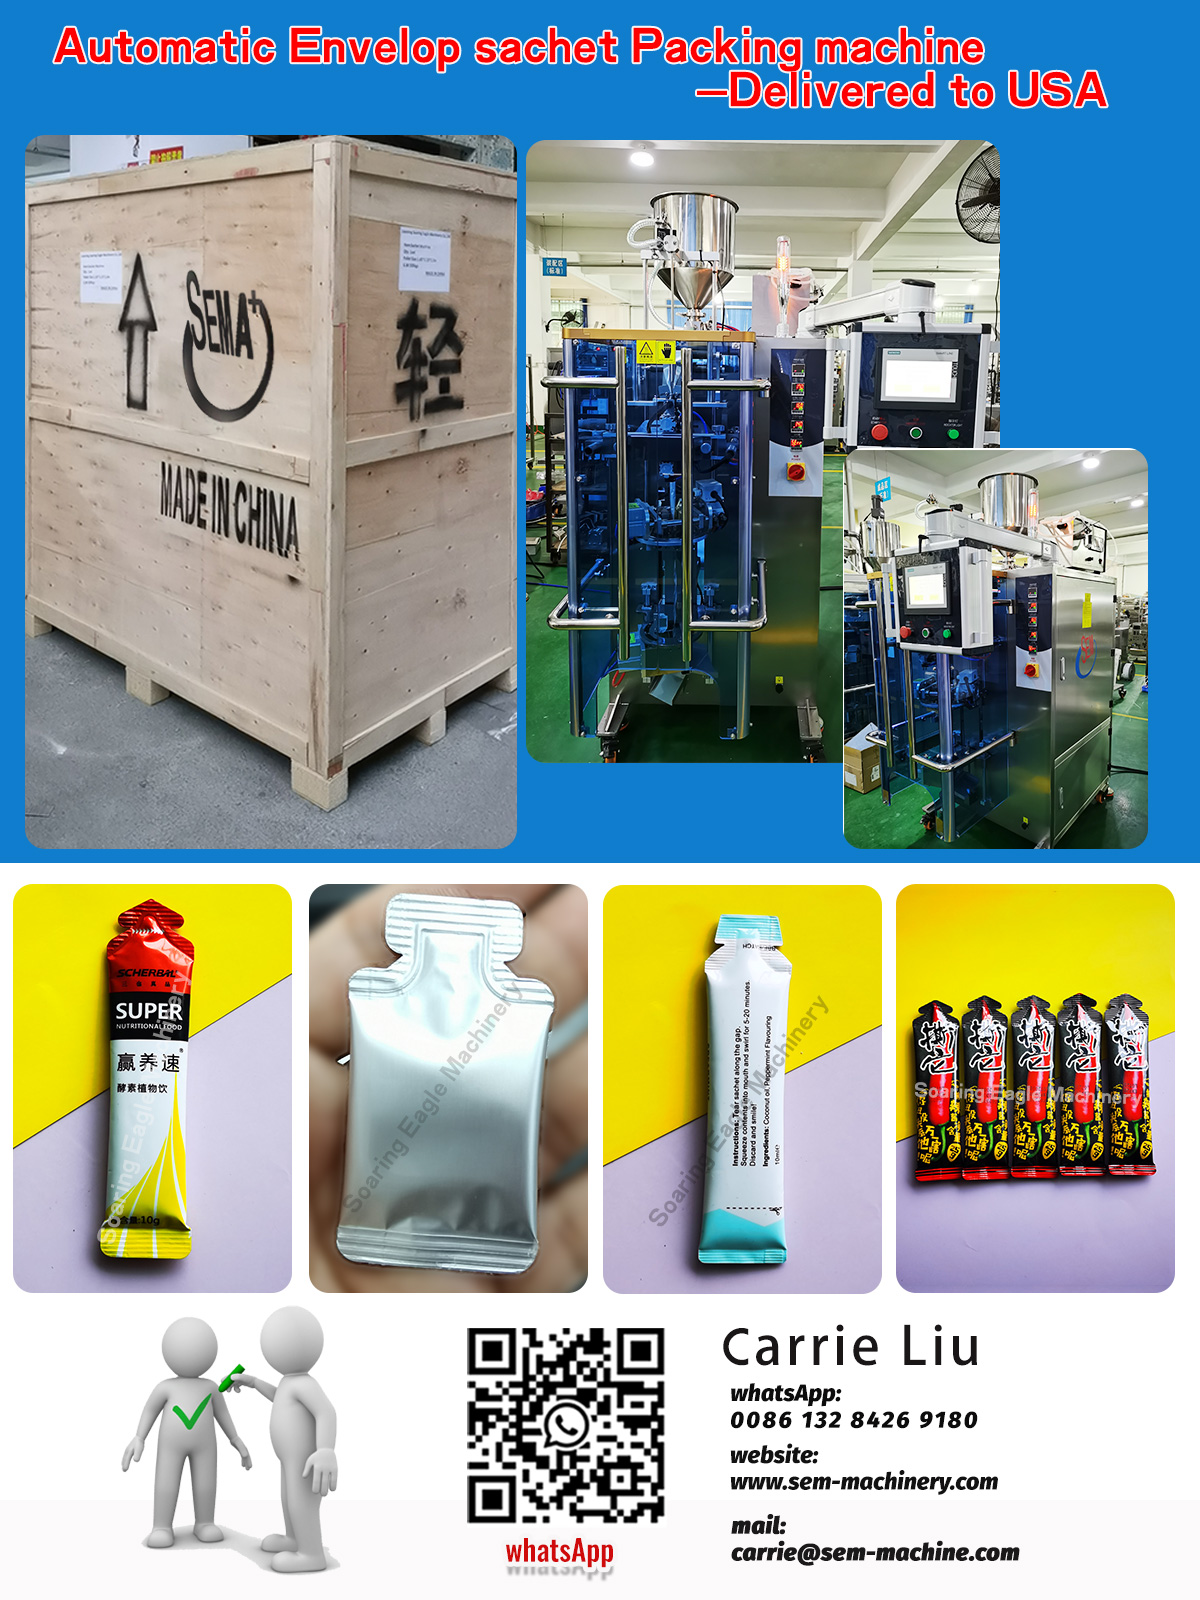 Automatic envelop sachet packing machine—delivered to USA